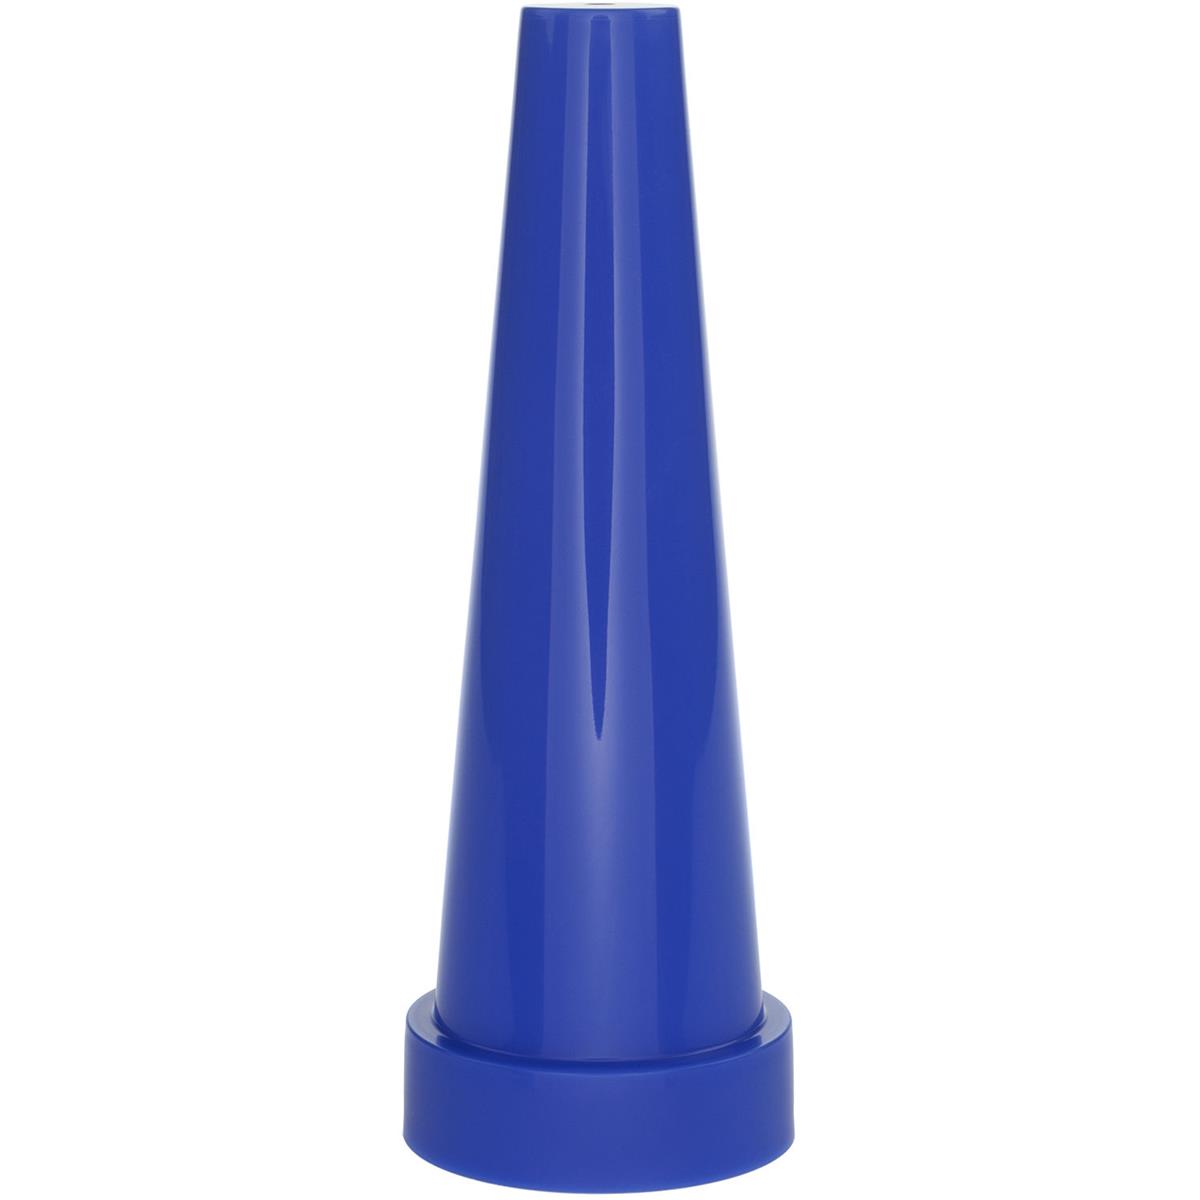 Nightstick Blue Safety Cone for 9514 / 9614 / 9744 / 9920 / 9924 / 9944 Series LED Lights